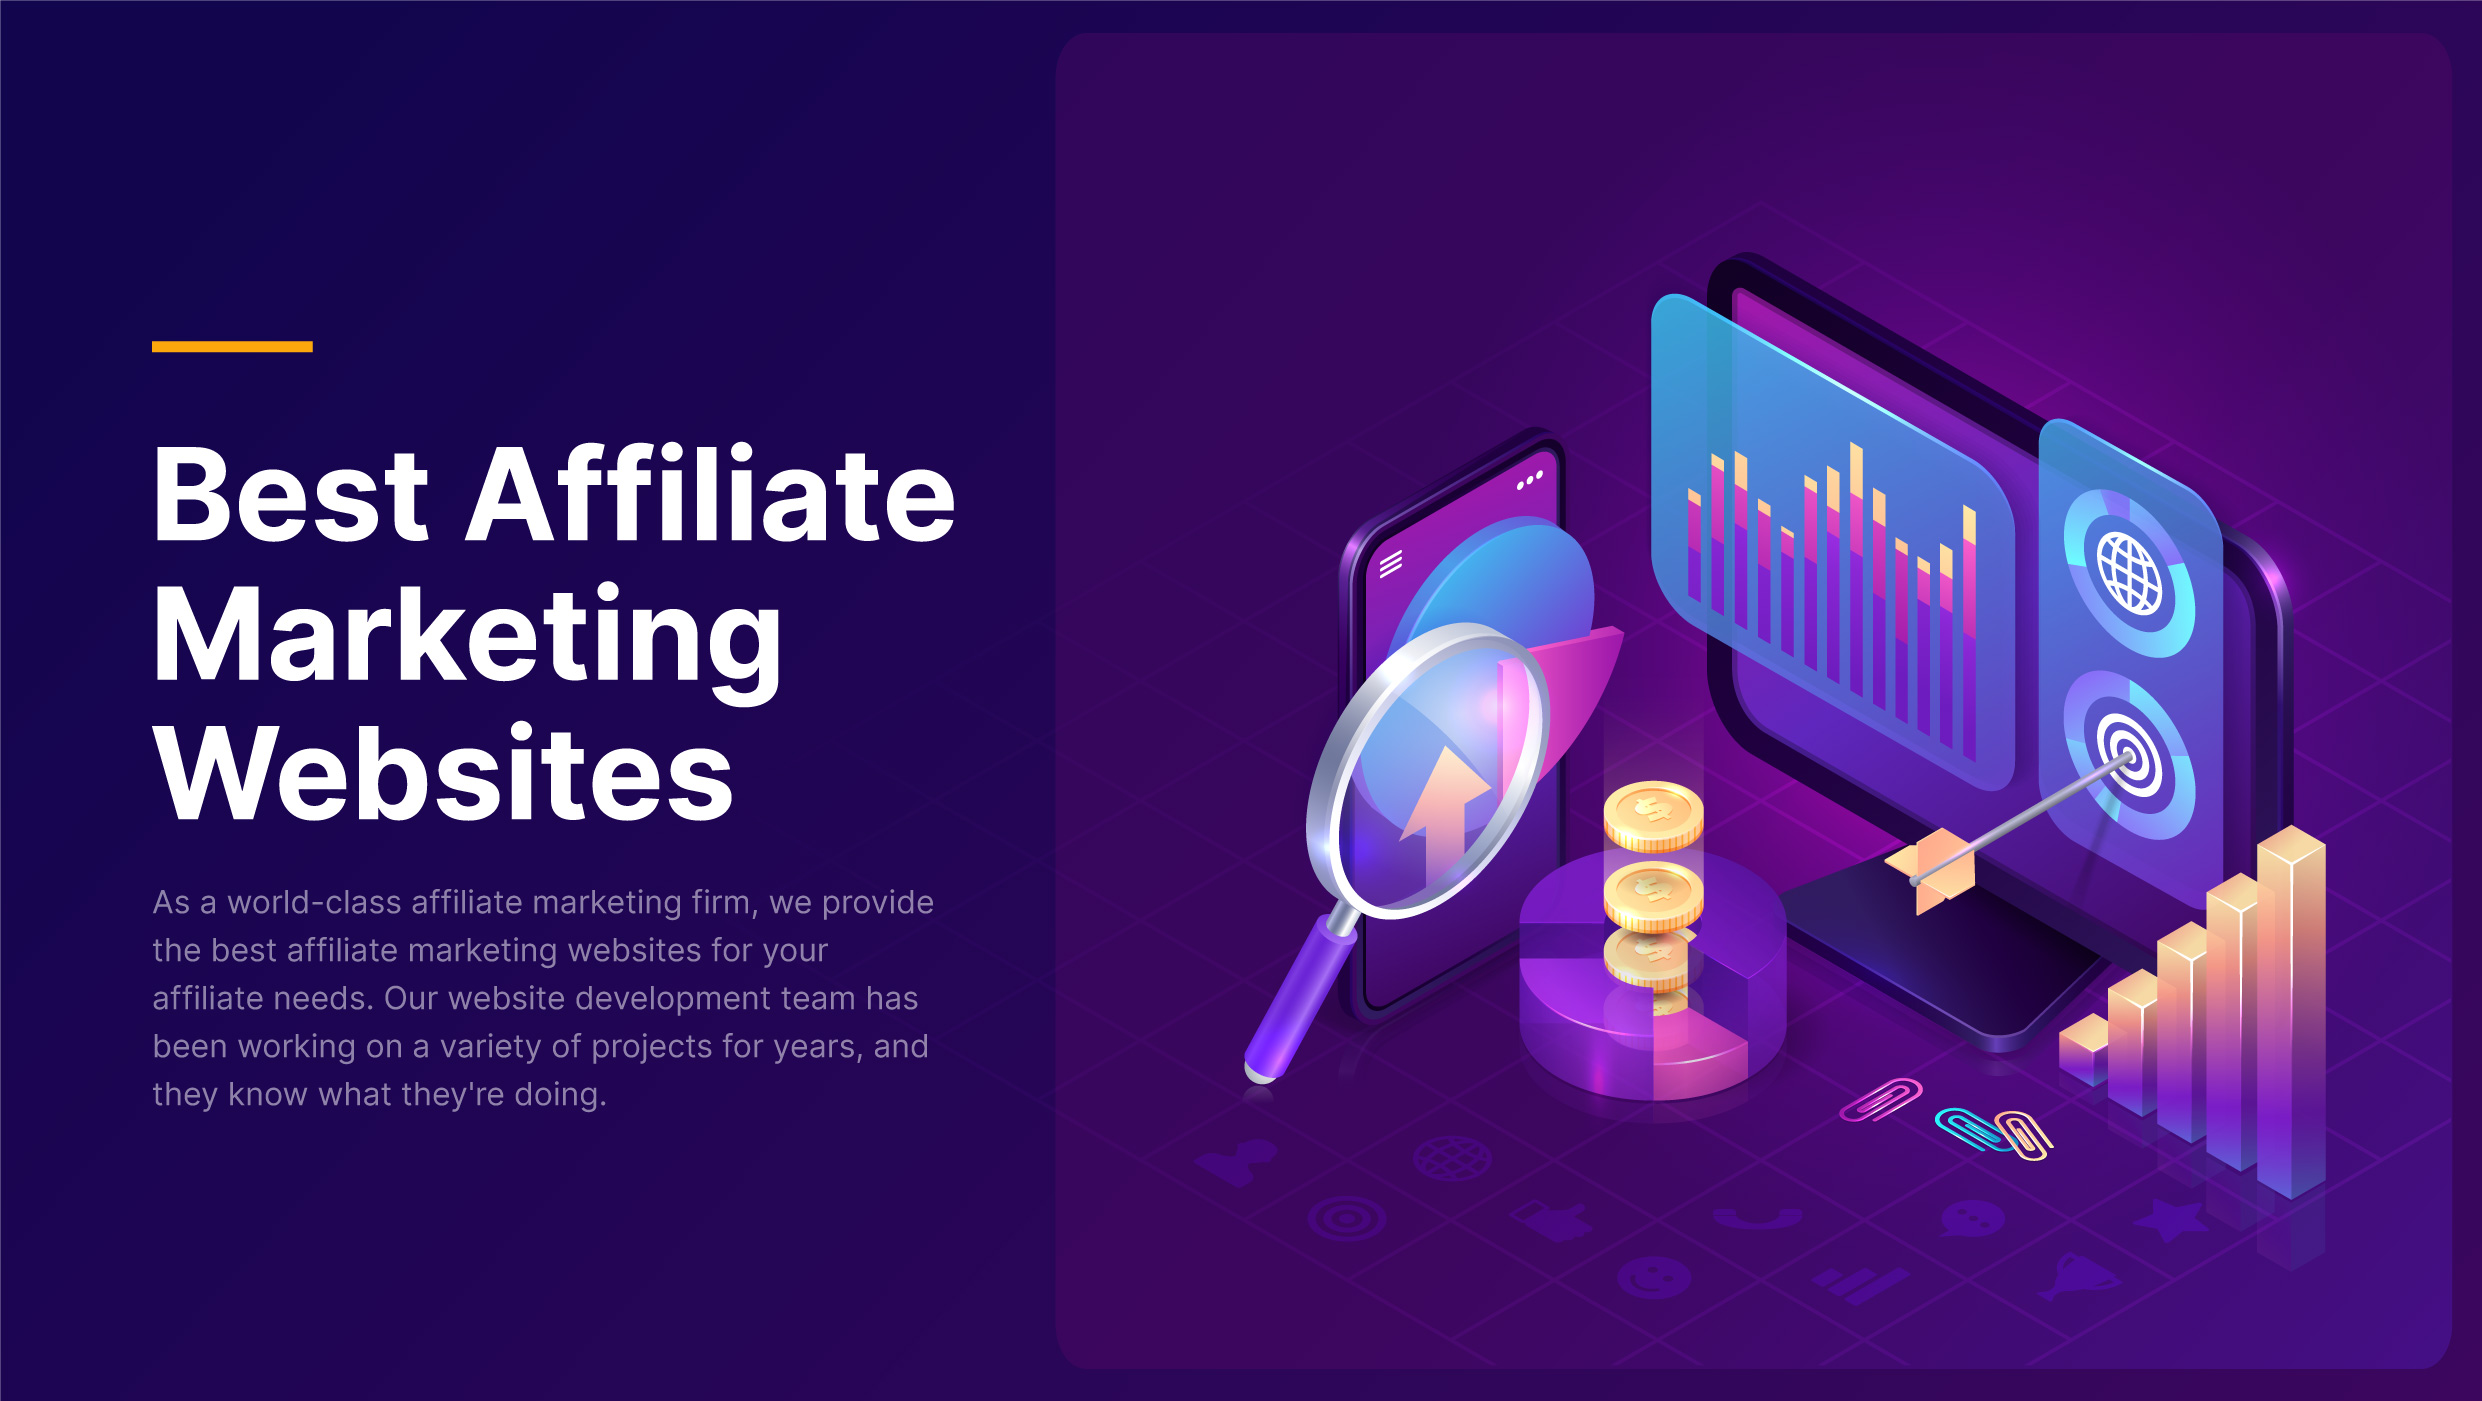 The Best Affiliate Marketing Publishers!